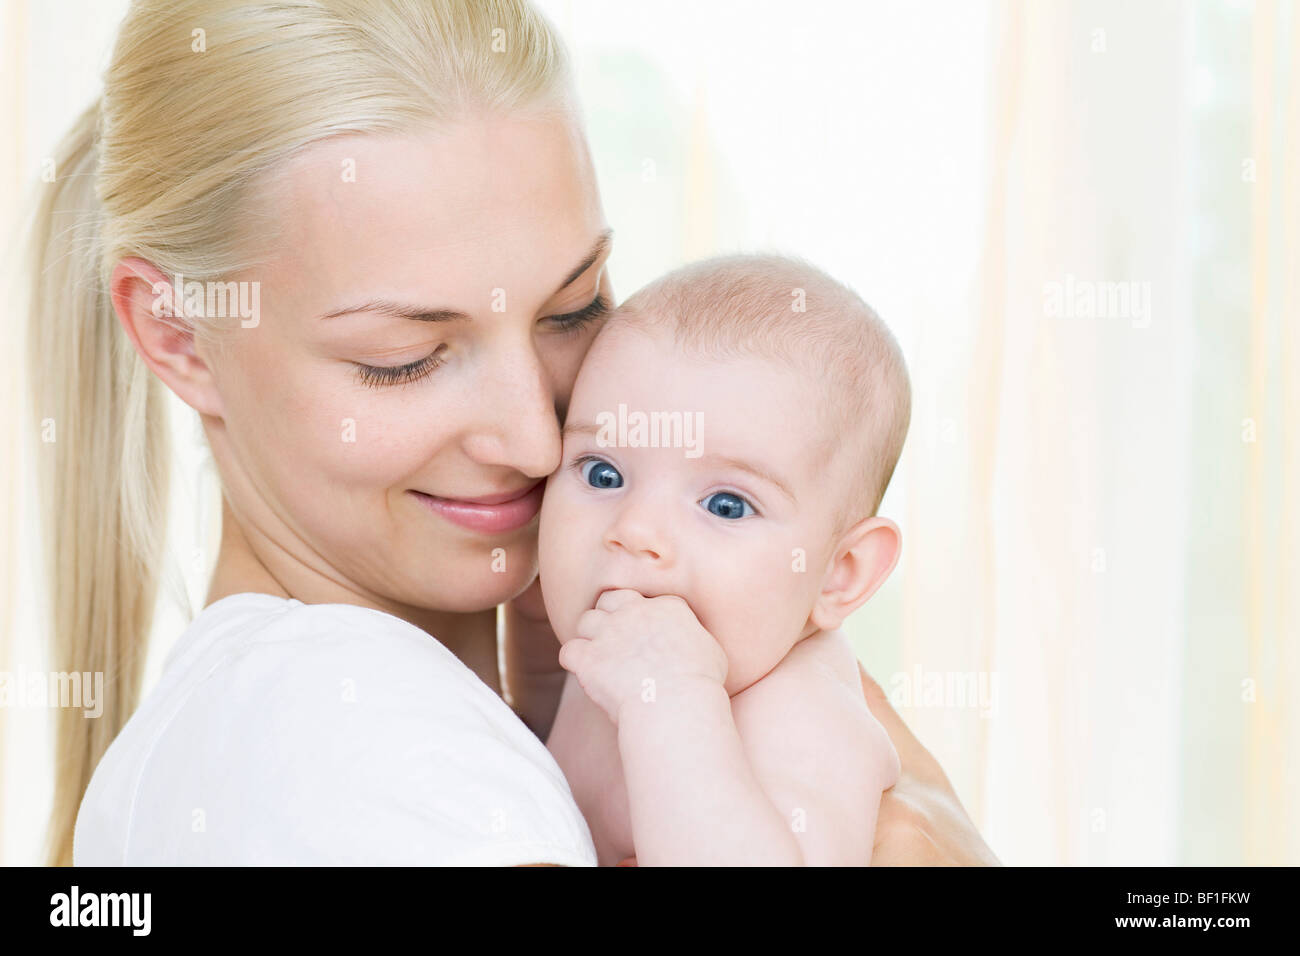 Portrait of a mother and baby daughter Stock Photo